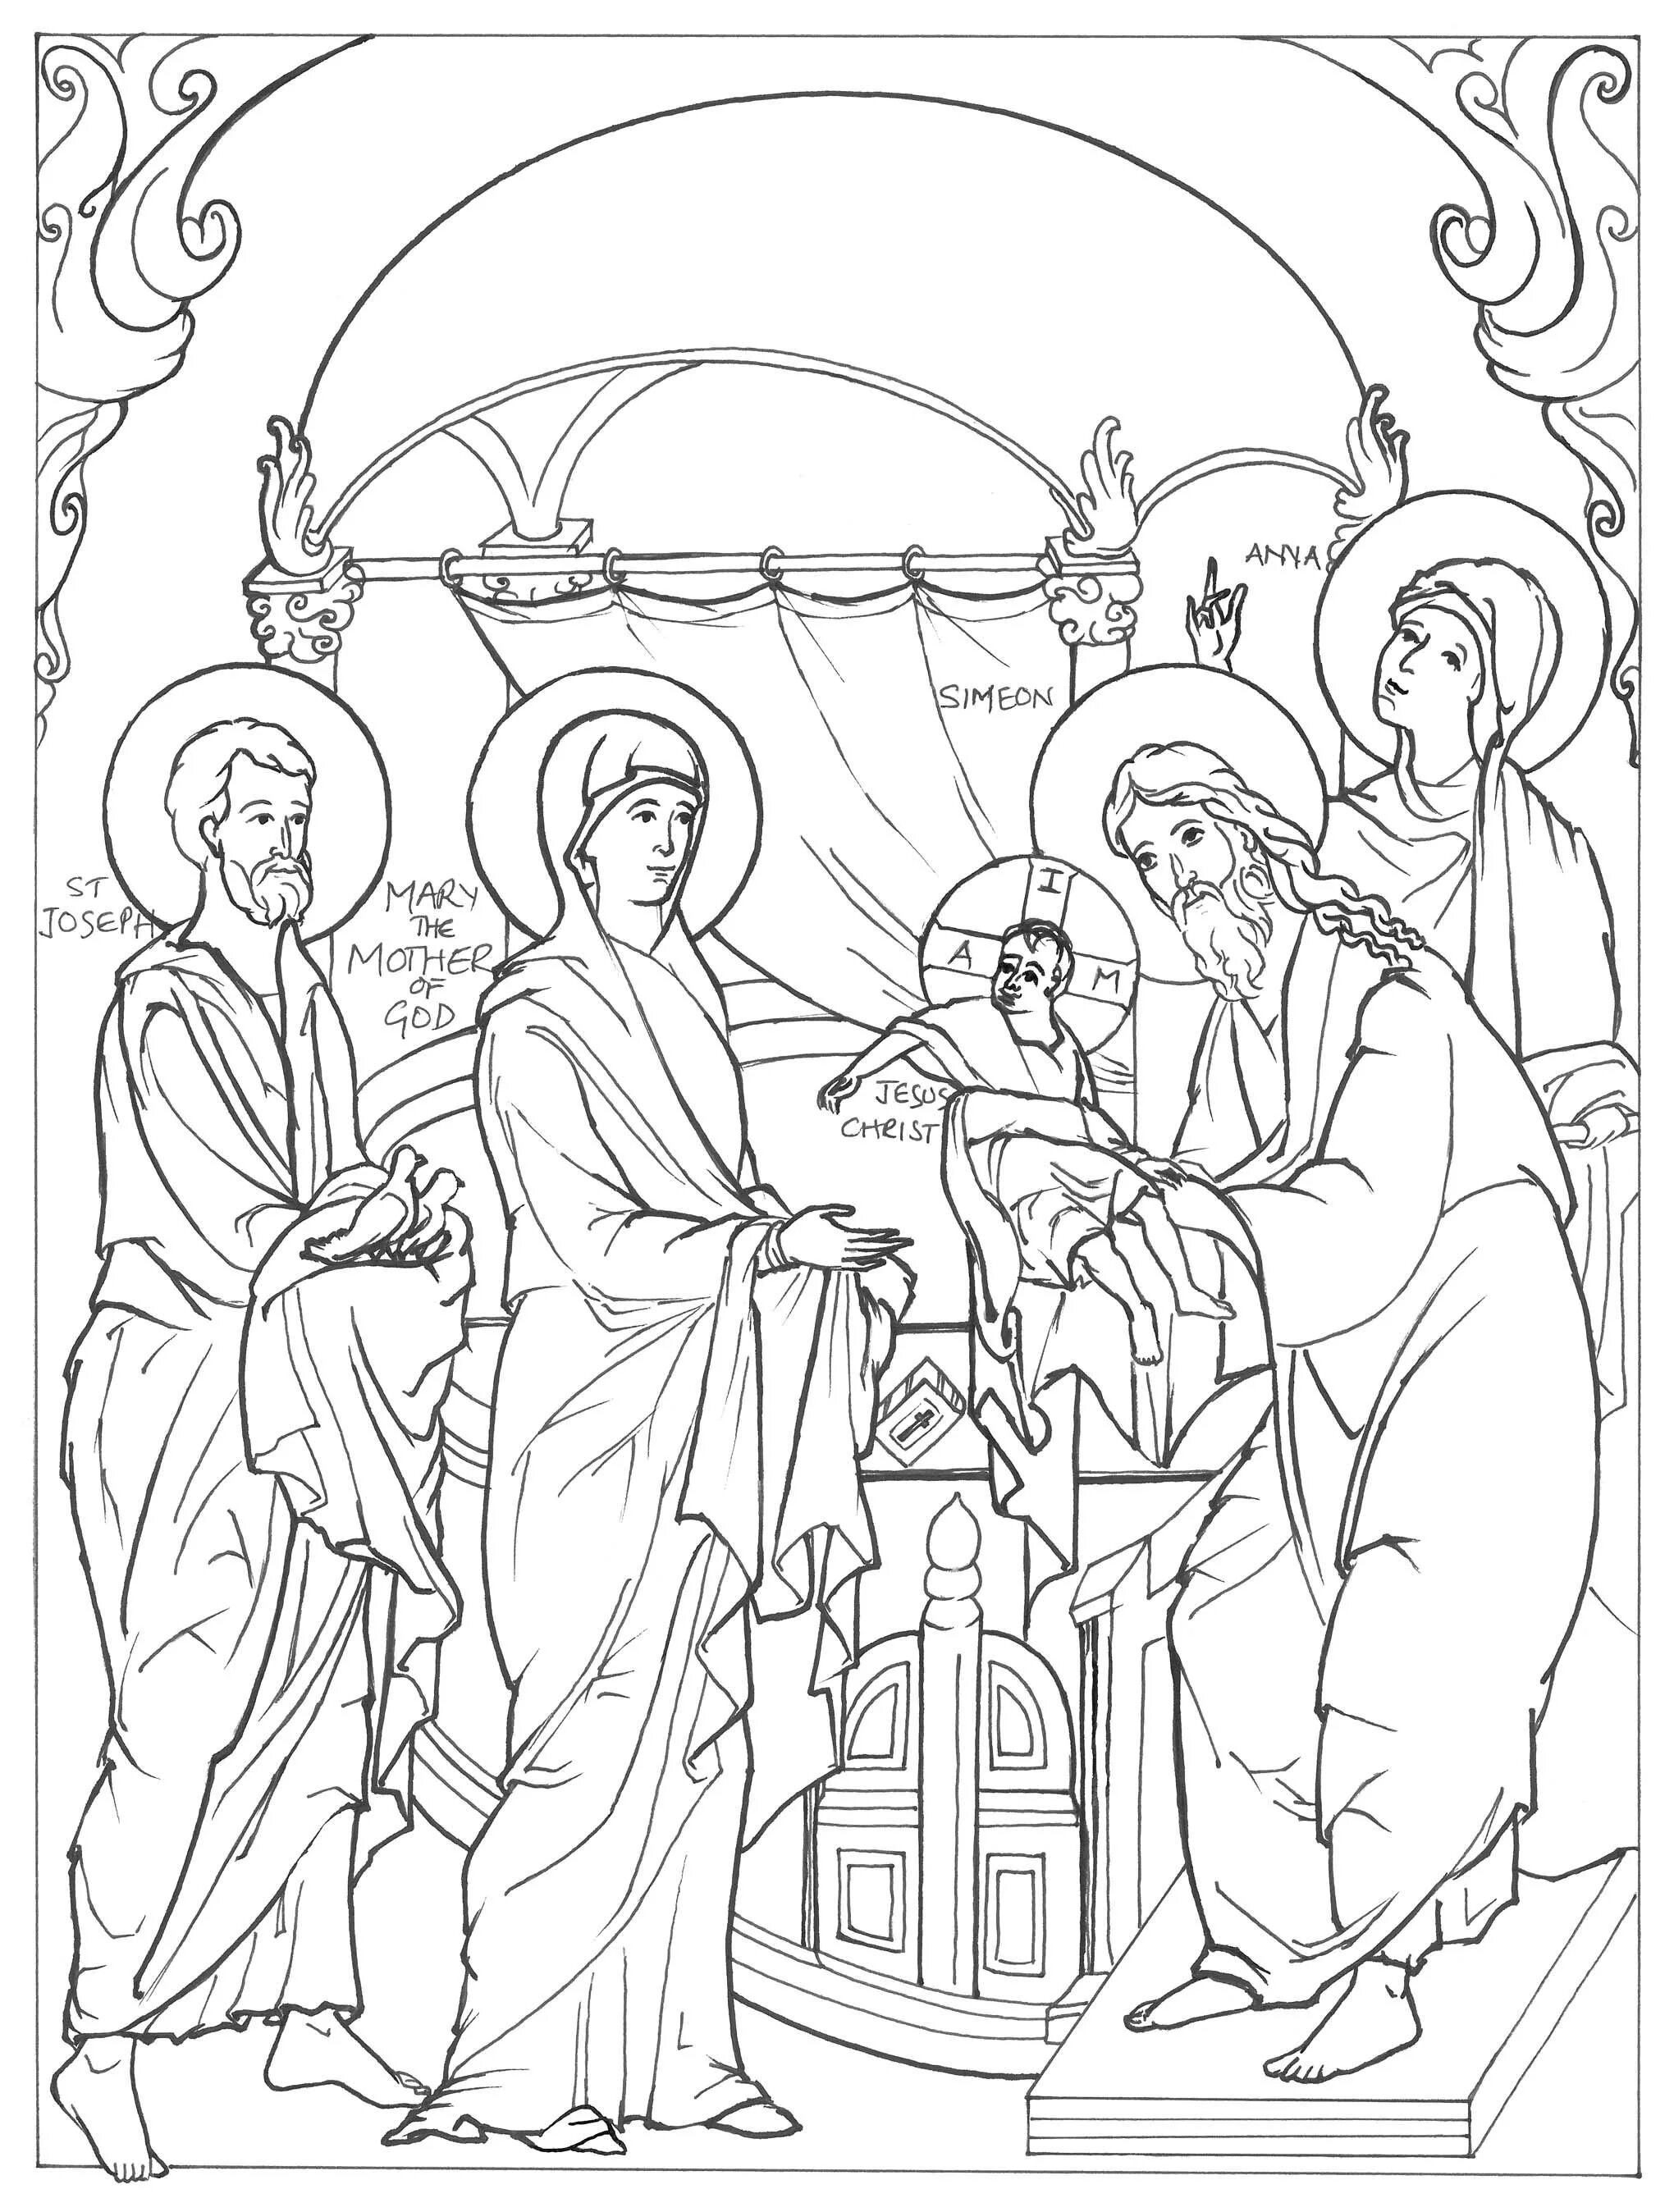 Colorful Orthodox holiday coloring book